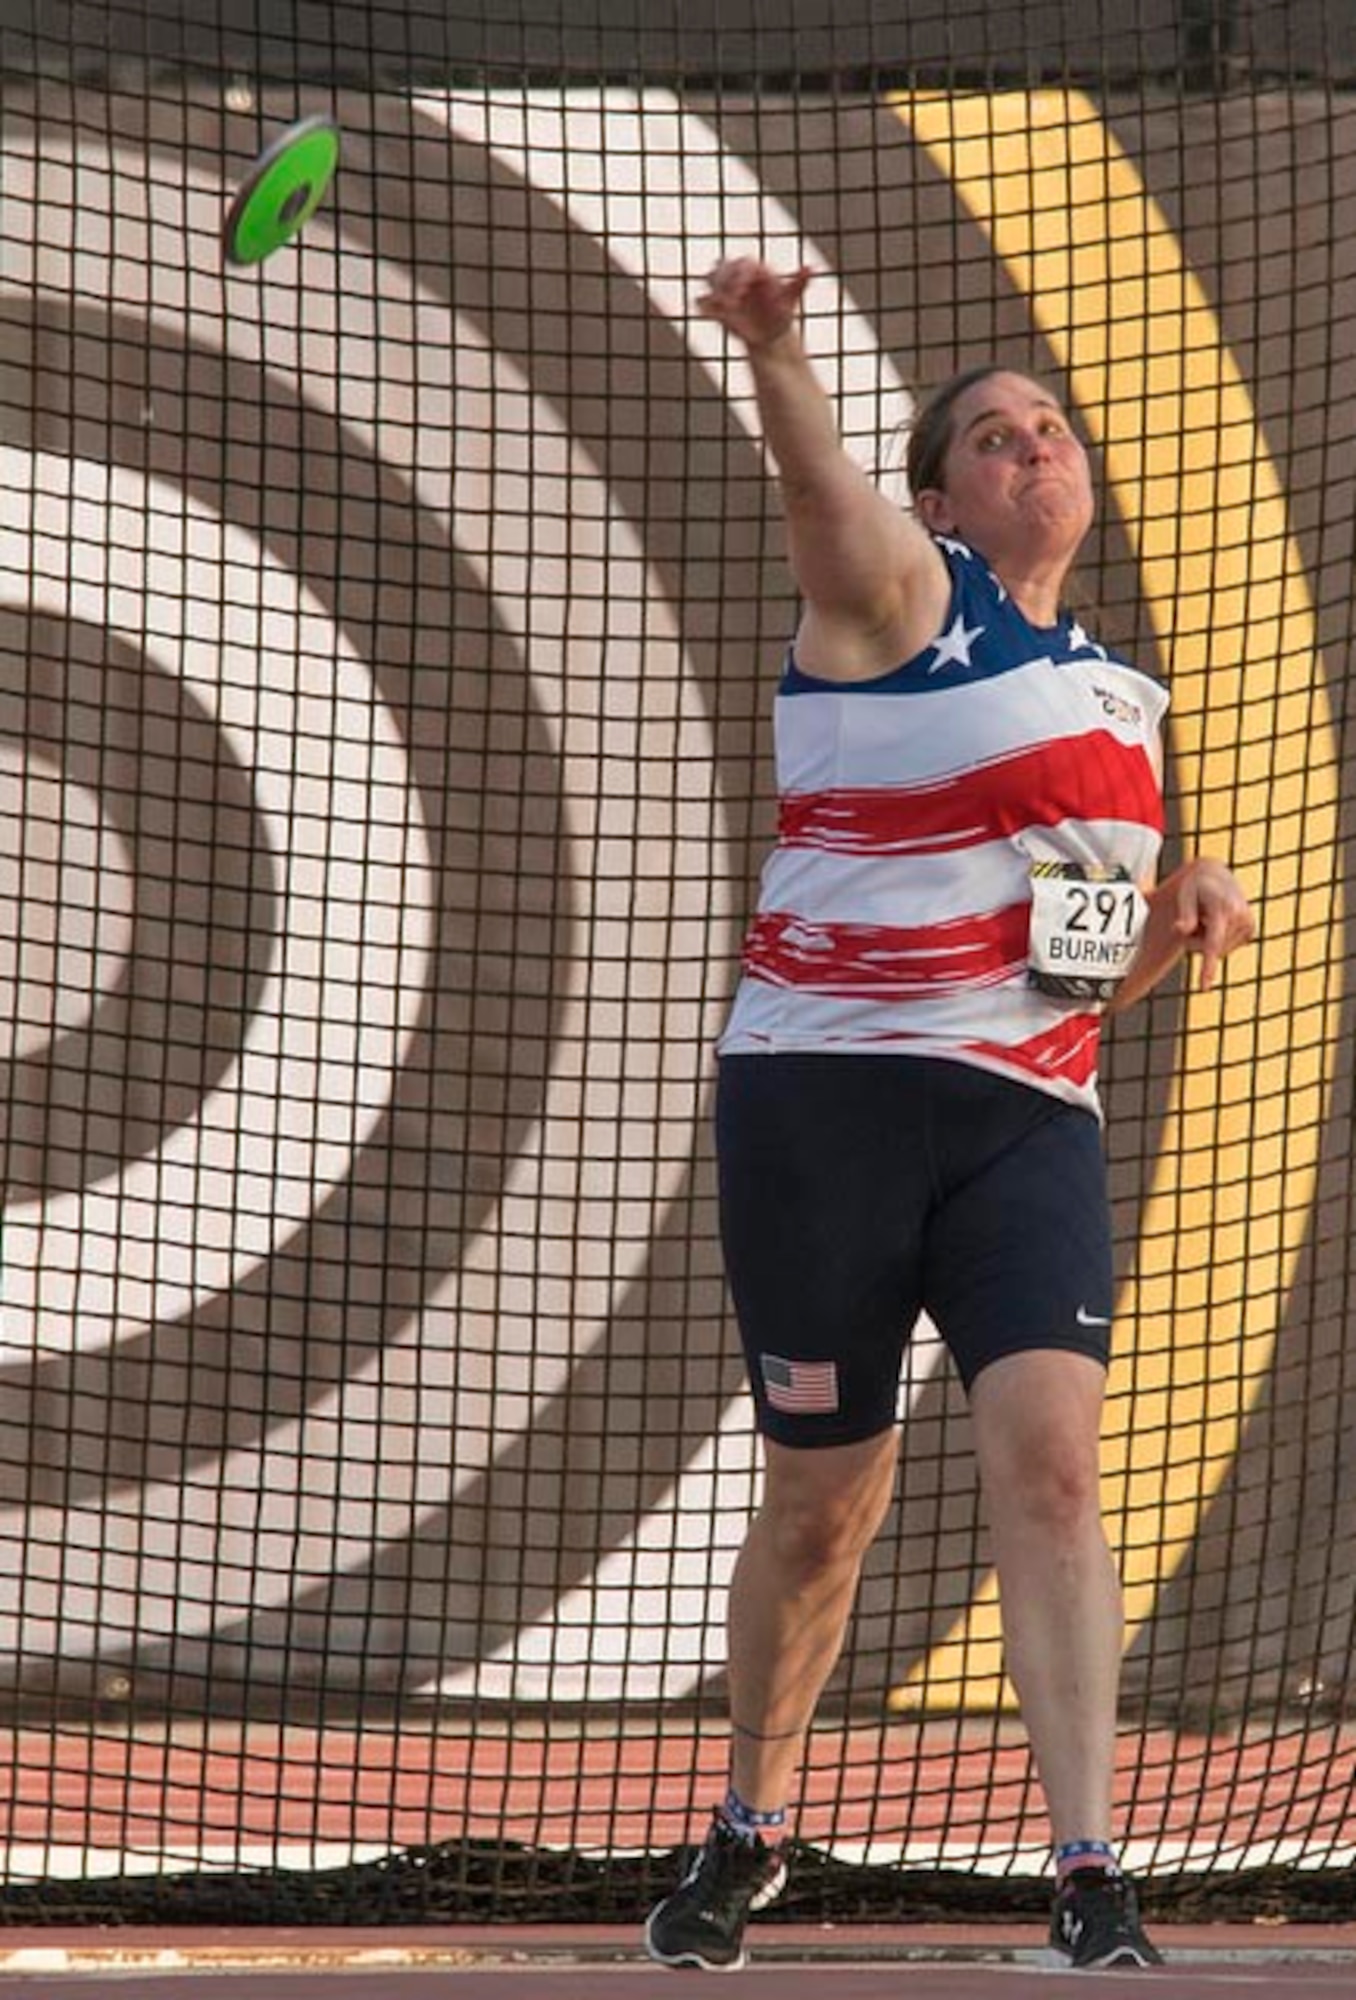 U.S. Air Force veteran Kyle Burnett, a former knowledge operations master sergeant, competes in the discus portion of athletics at the 2017 Invictus Games in Toronto, Canada, Sept. 24, 2017. Burnett sustained a permanent traumatic brain injury and was later diagnosed with posttraumatic stress disorder after a rocket landed roughly 10 feet away from her while stationed in Basra, Iraq in 2009. (Courtesy photo)